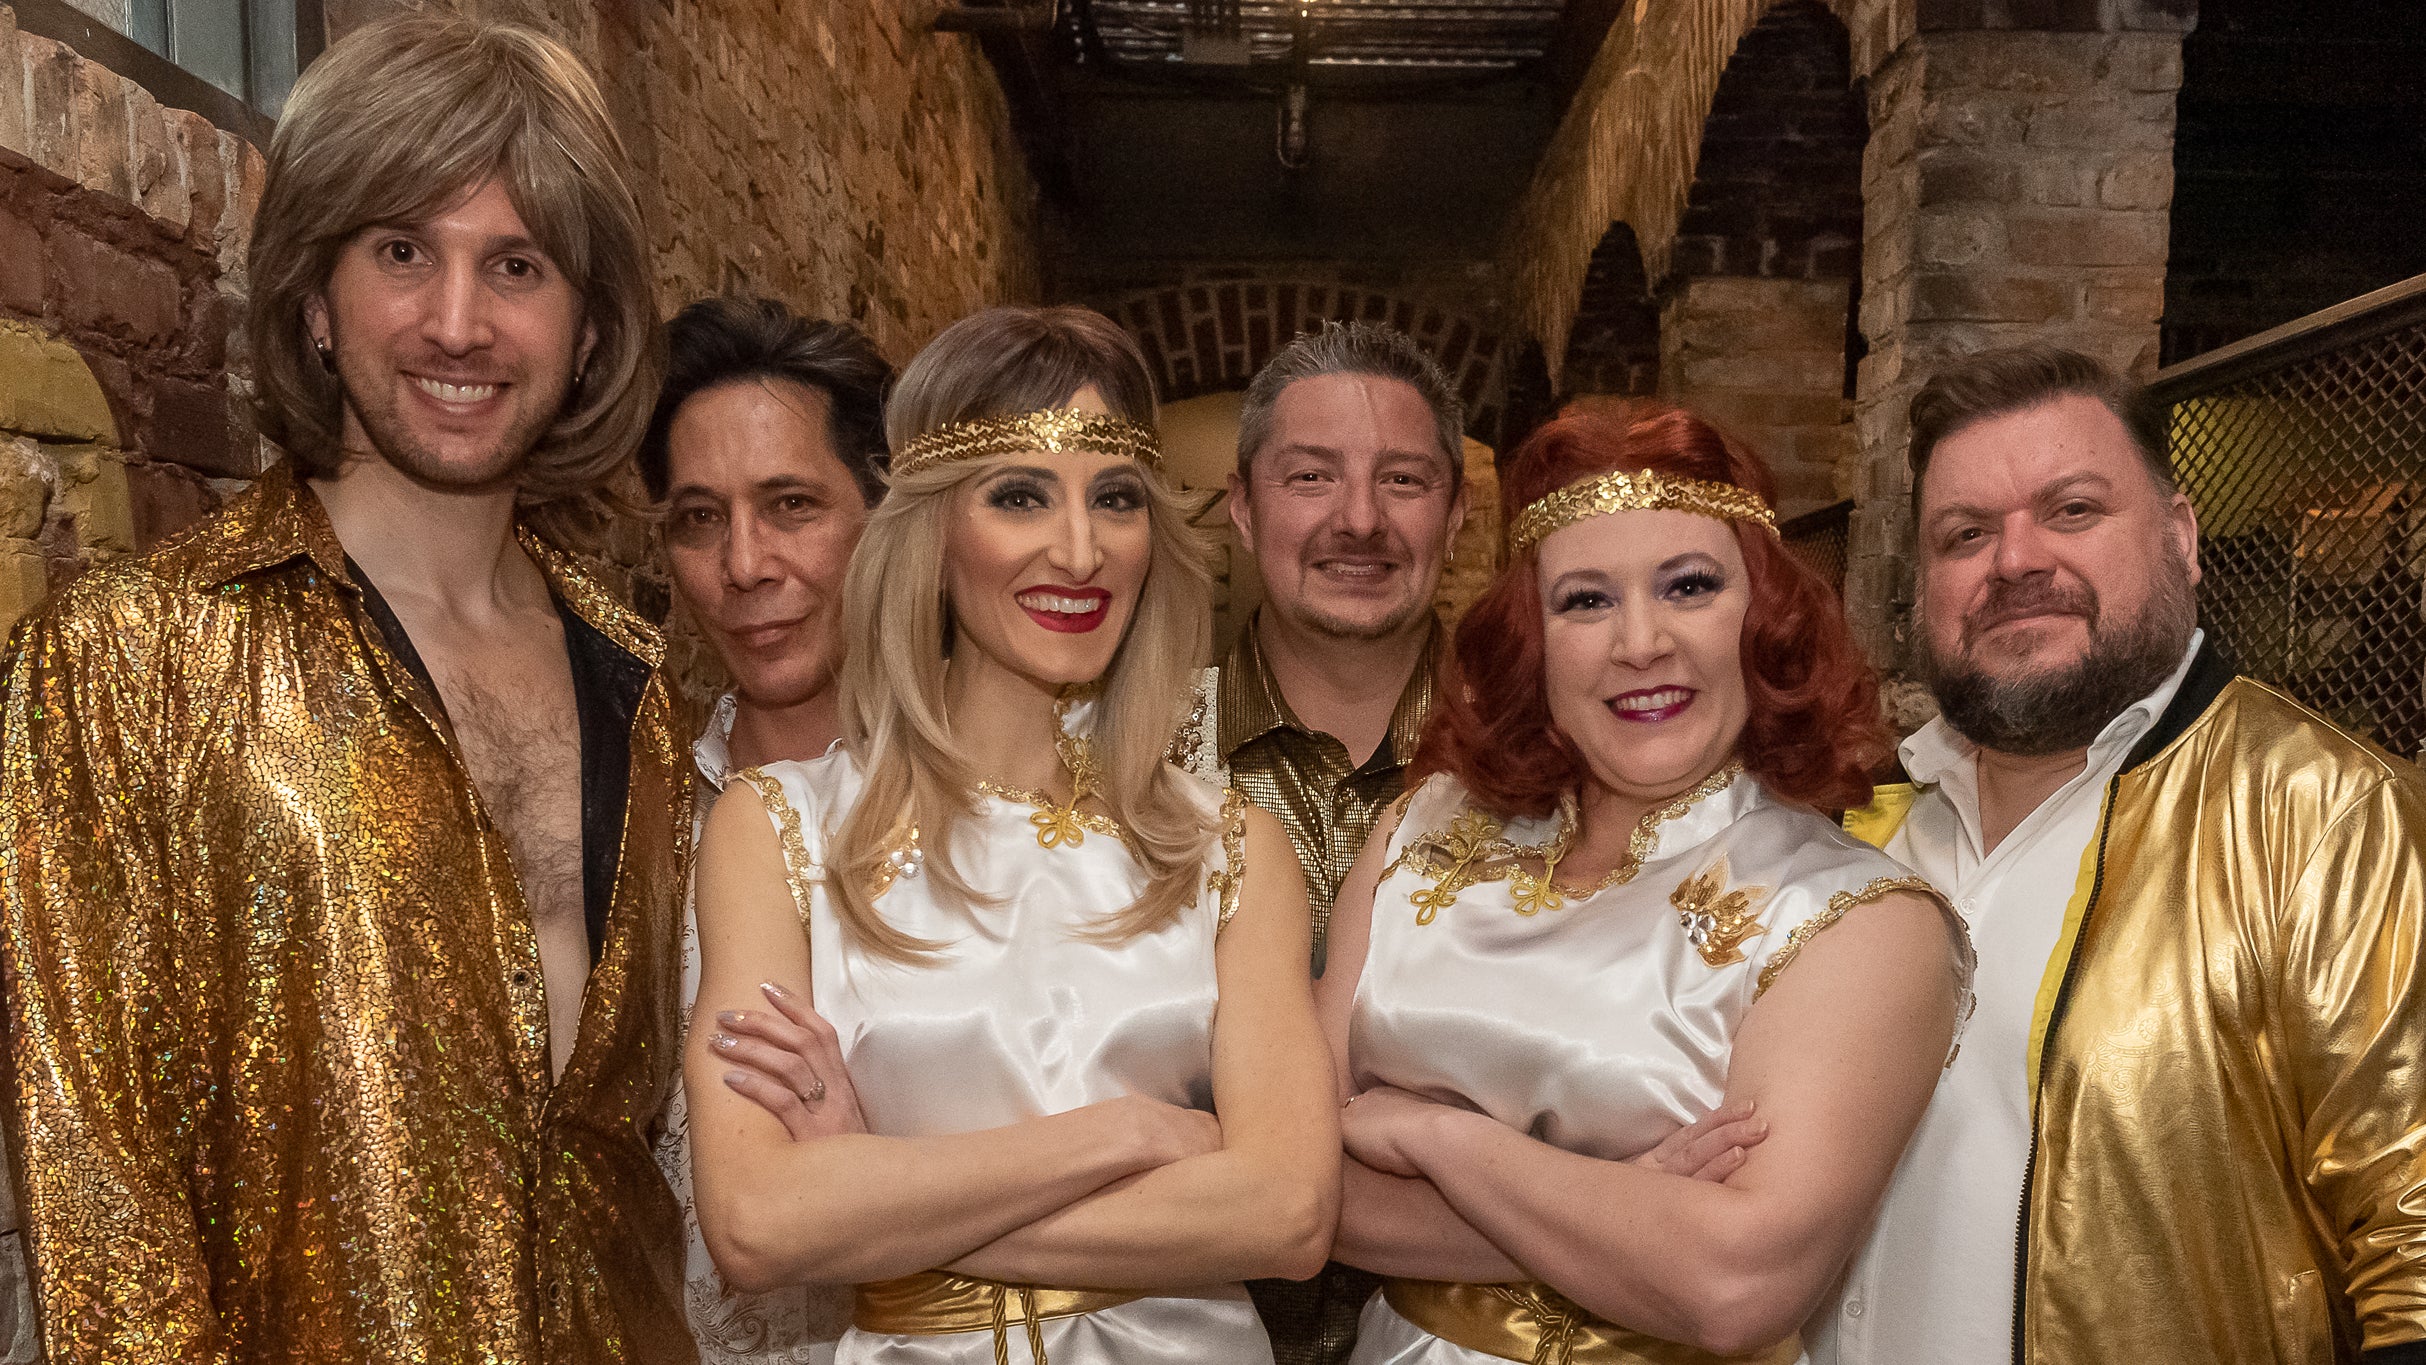 Dancing Queen: A Tribute to Abba in Niagara Falls promo photo for Official Platinum presale offer code